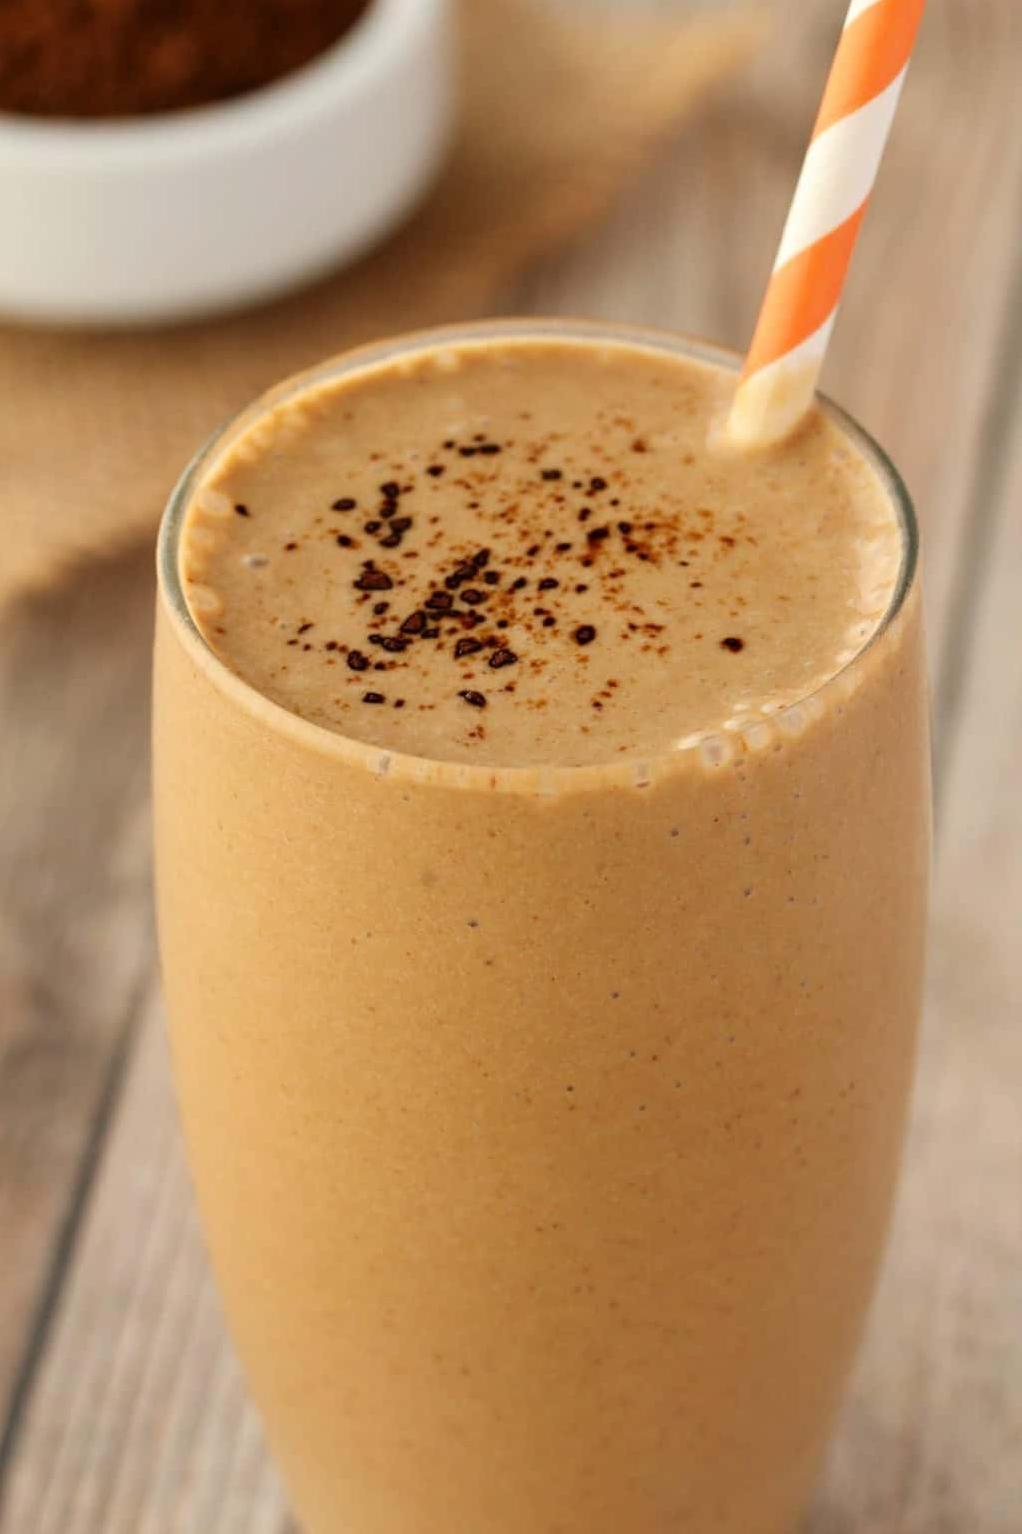  Sip into summer with this refreshing Iced Coffee Shake!